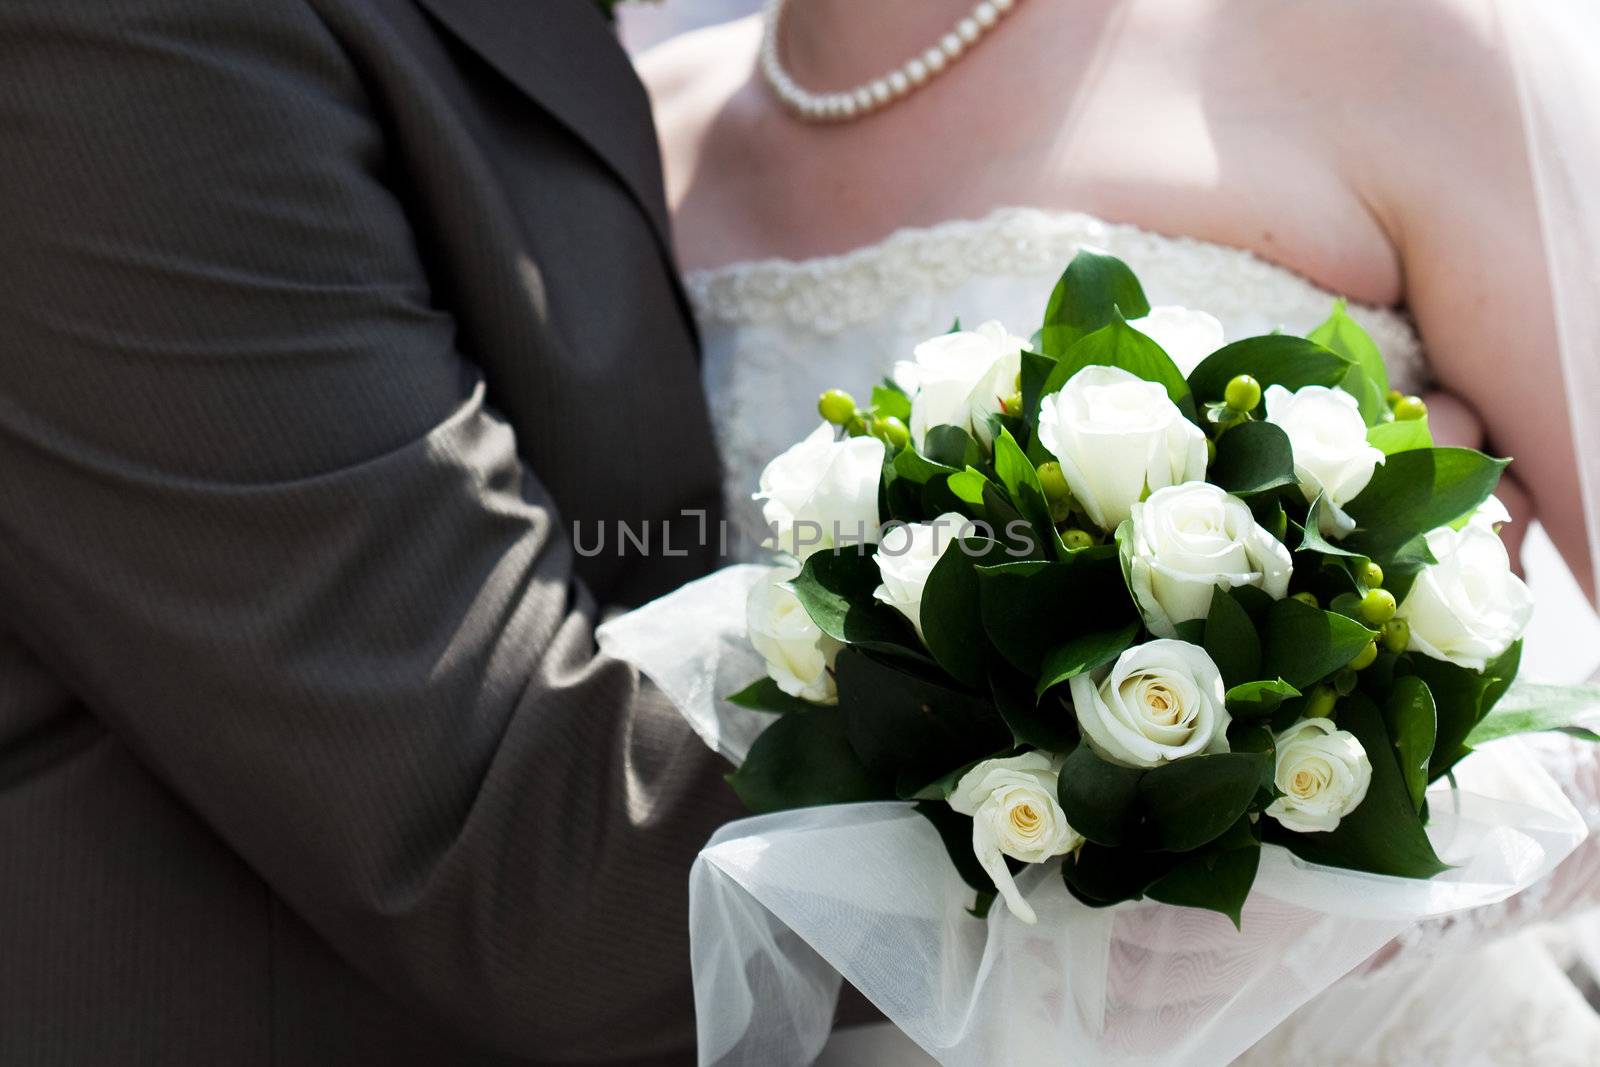 the bride and groom with a bouquet of flowers